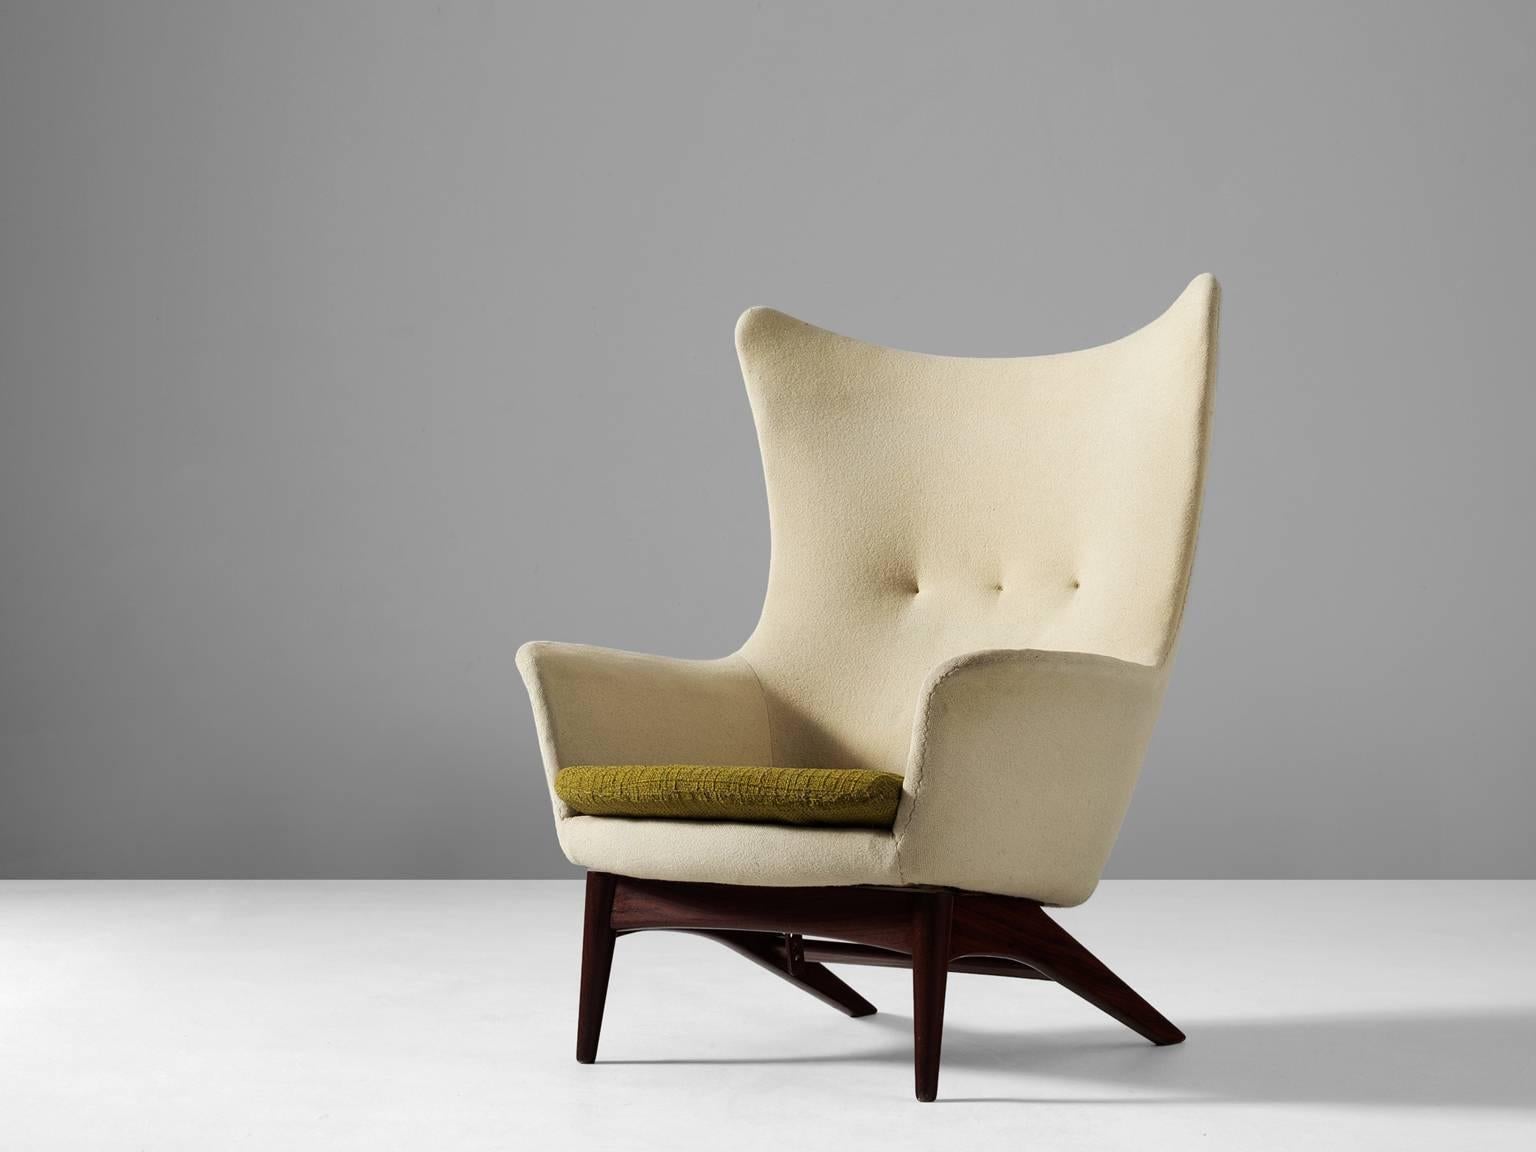 Wingback chair, by H.W. Klein for Bramin, Denmark, 1950s.

Sculptural lounge chair by Henry Walter Klein. This wingback chair is a great example of Scandinavian design and comfort. Beautiful organic formed seating, with solid wooden frame. The